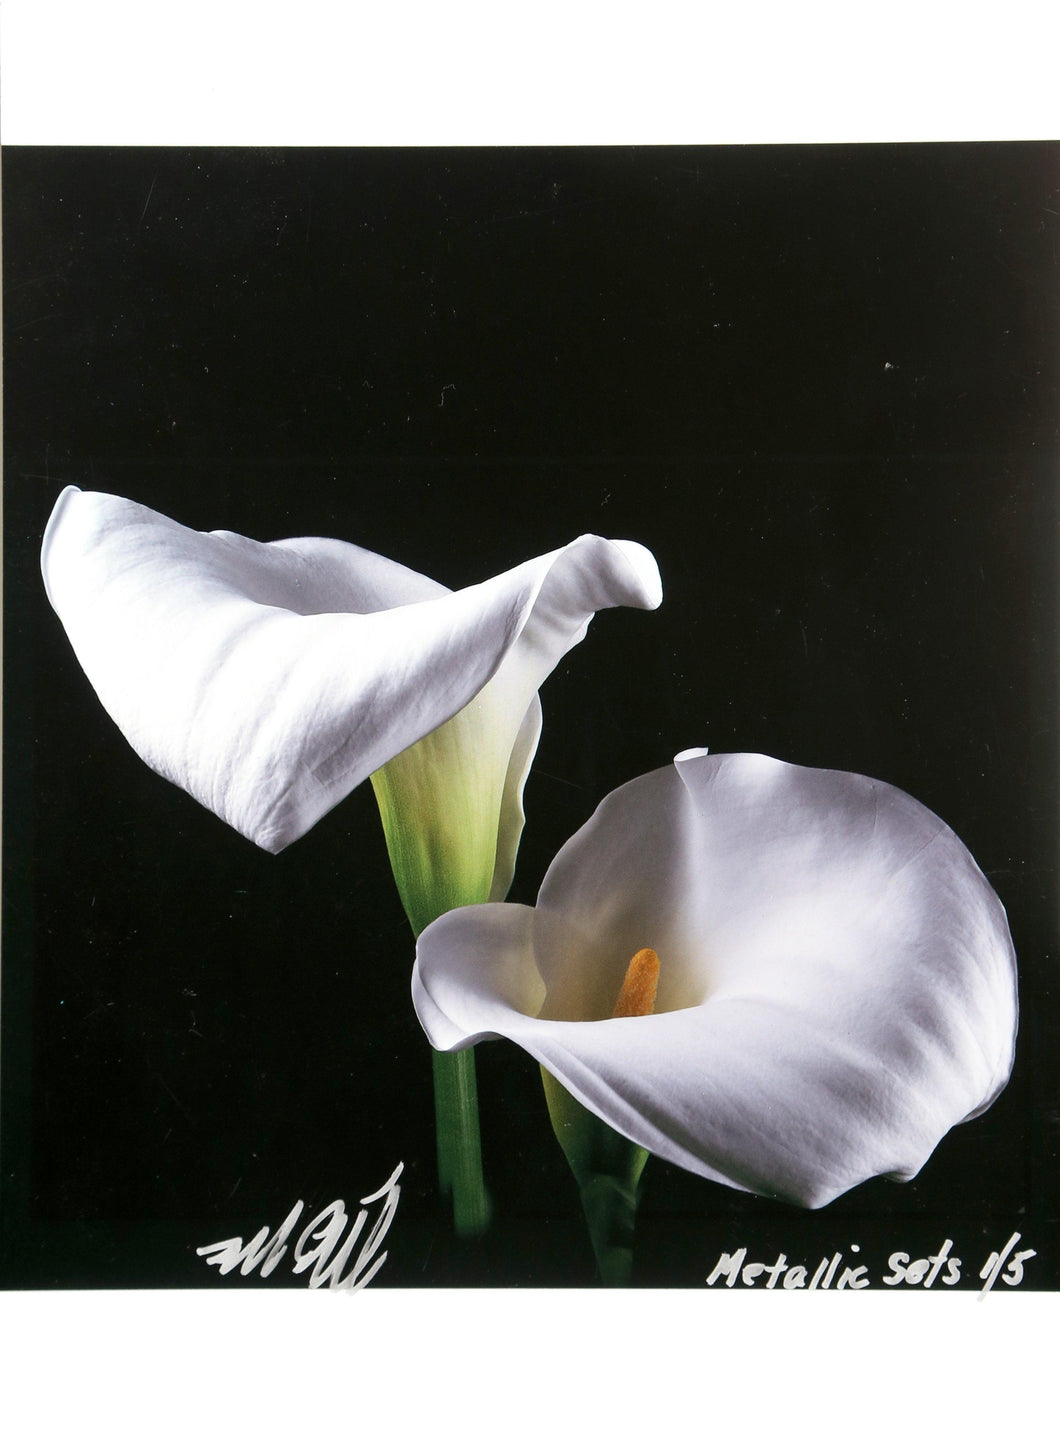 Calla Lily from the Metallic Sets Color | Jonathan Singer,{{product.type}}